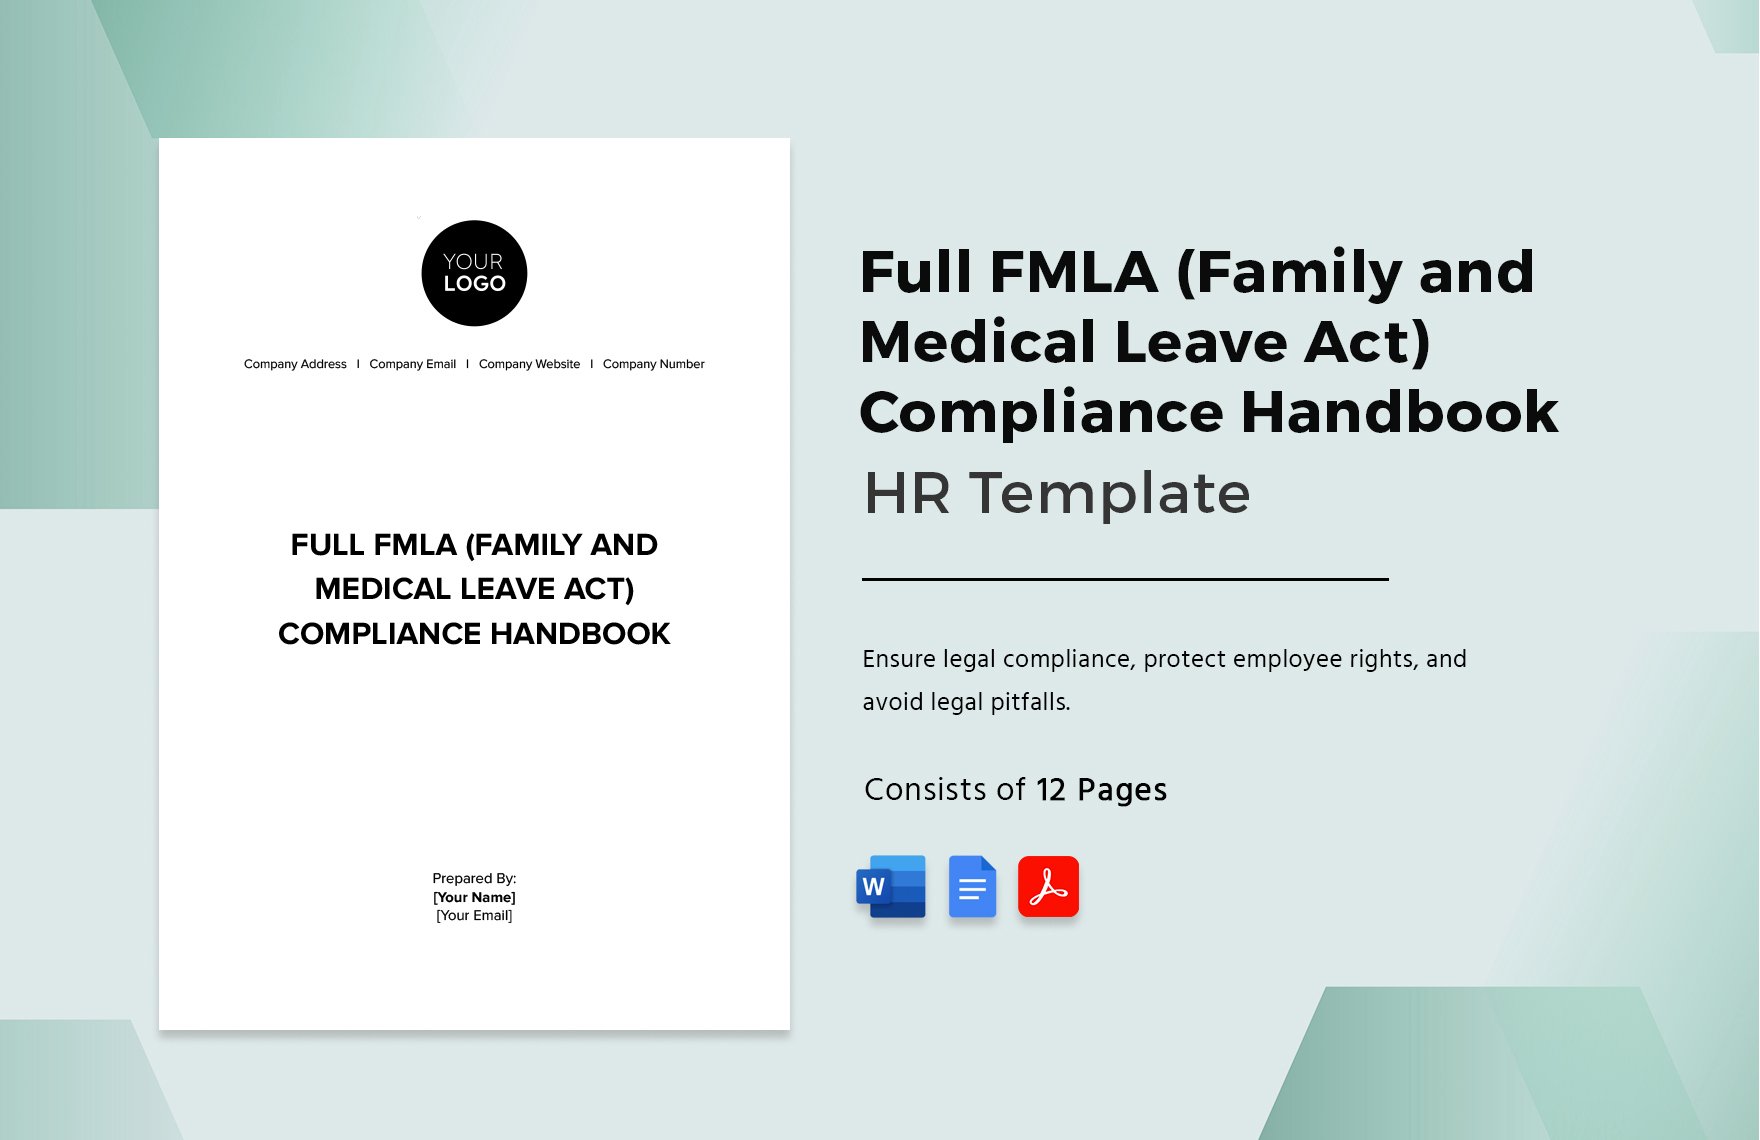 Full FMLA (Family and Medical Leave Act) Compliance Handbook HR Template